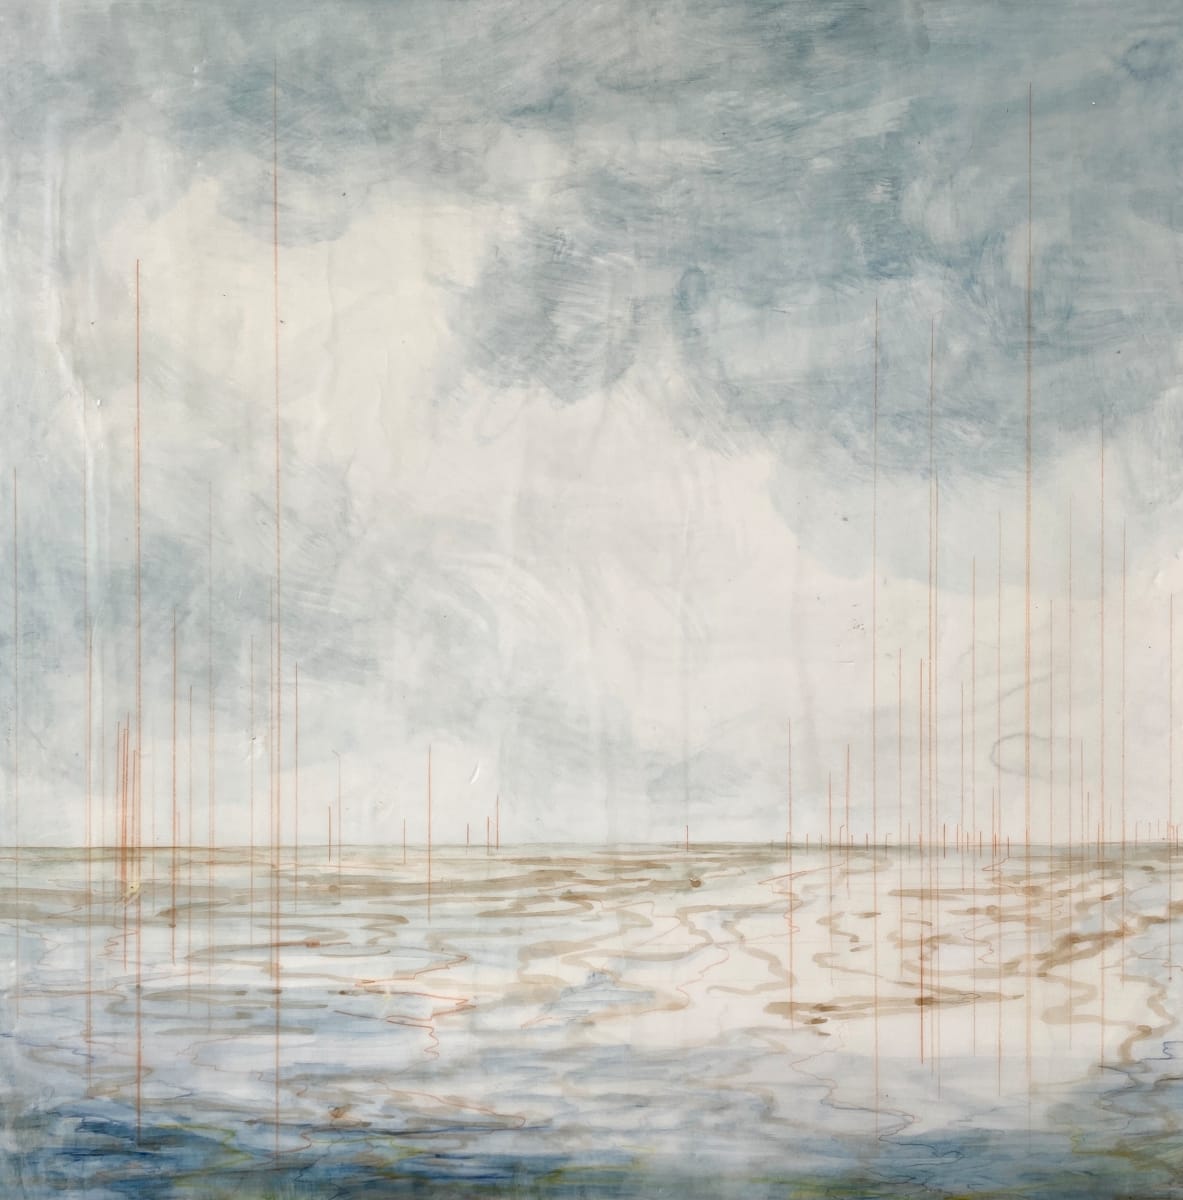 Measuring the Tide  Image: Measuring the Tide
Encaustic mixed media
12x12"